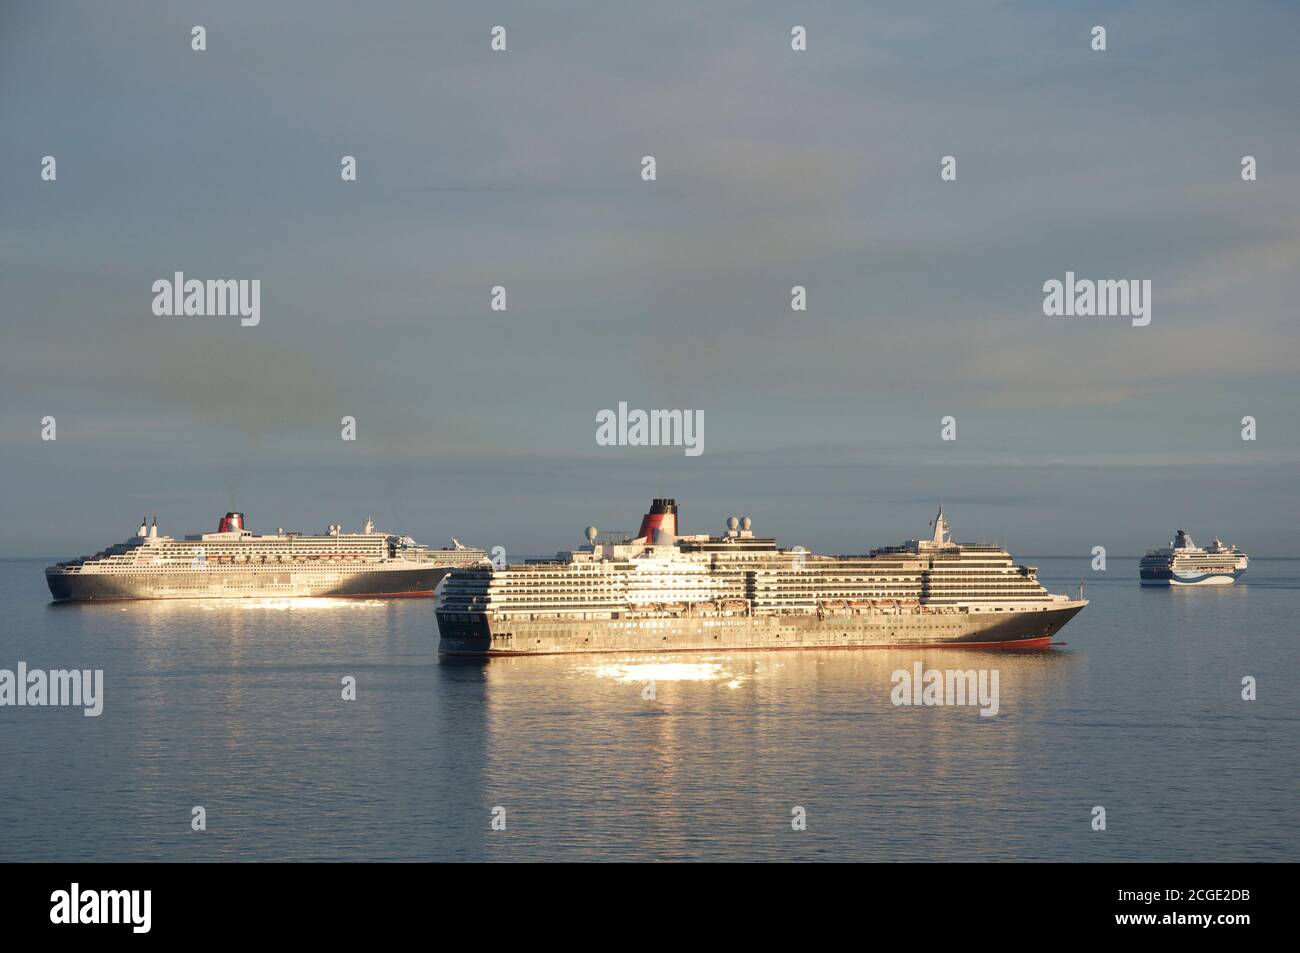 Cruise ships: Queen Victoria, Queen Mary 2, Marella Explorer and Marella Discovery anchored in Weymouth Bay. Mothballed during the Covid-19 pandemic. Stock Photo